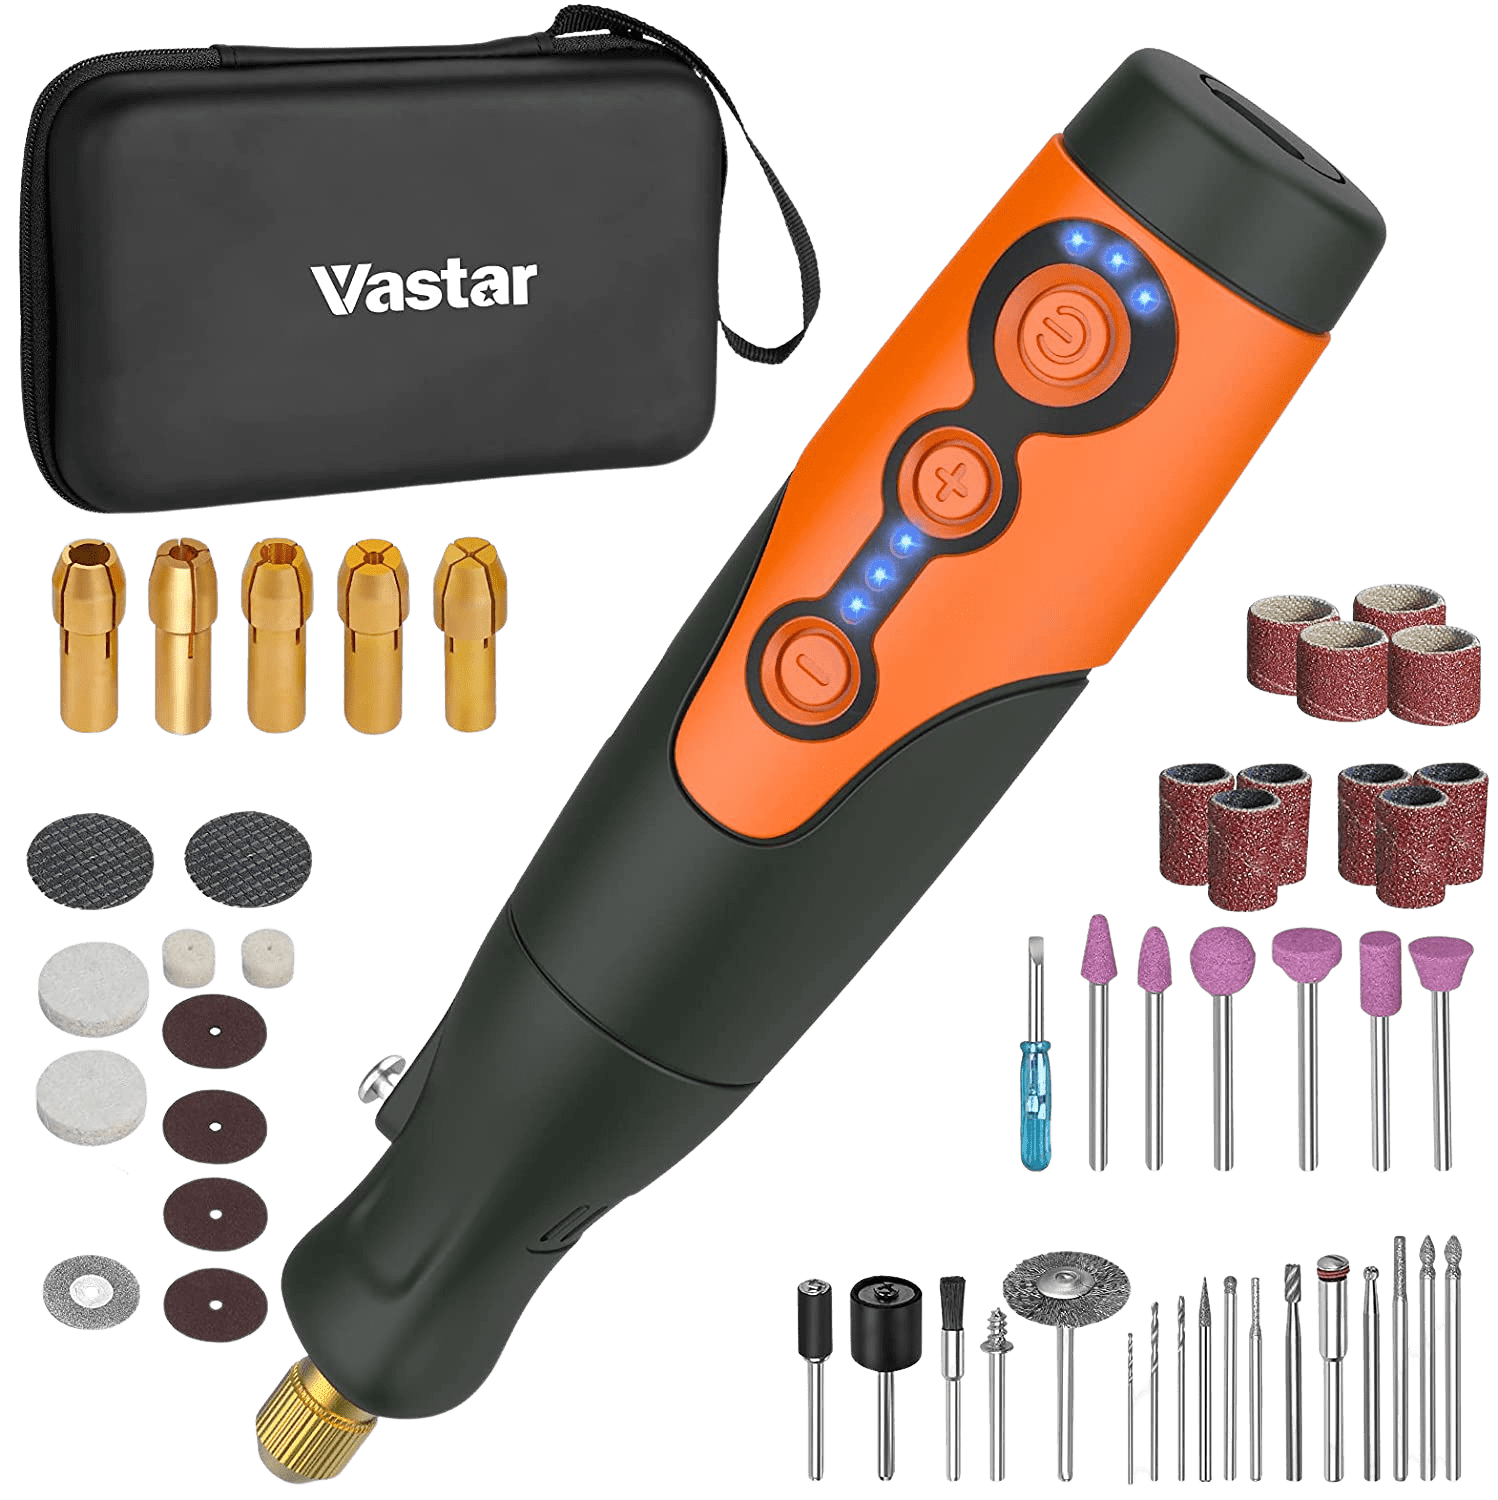 Vastar Cordless Rotary Tool Kit - 3.7V 2.0Ah Type-C Fast Charge 3-Speed Variable Mini Rotary Tool with 51pcs Accessories - DIY Carving,Cutting,Polishing,Detail Sanding,Nail Grinding and Engraving Tool | Decor Gifts and More